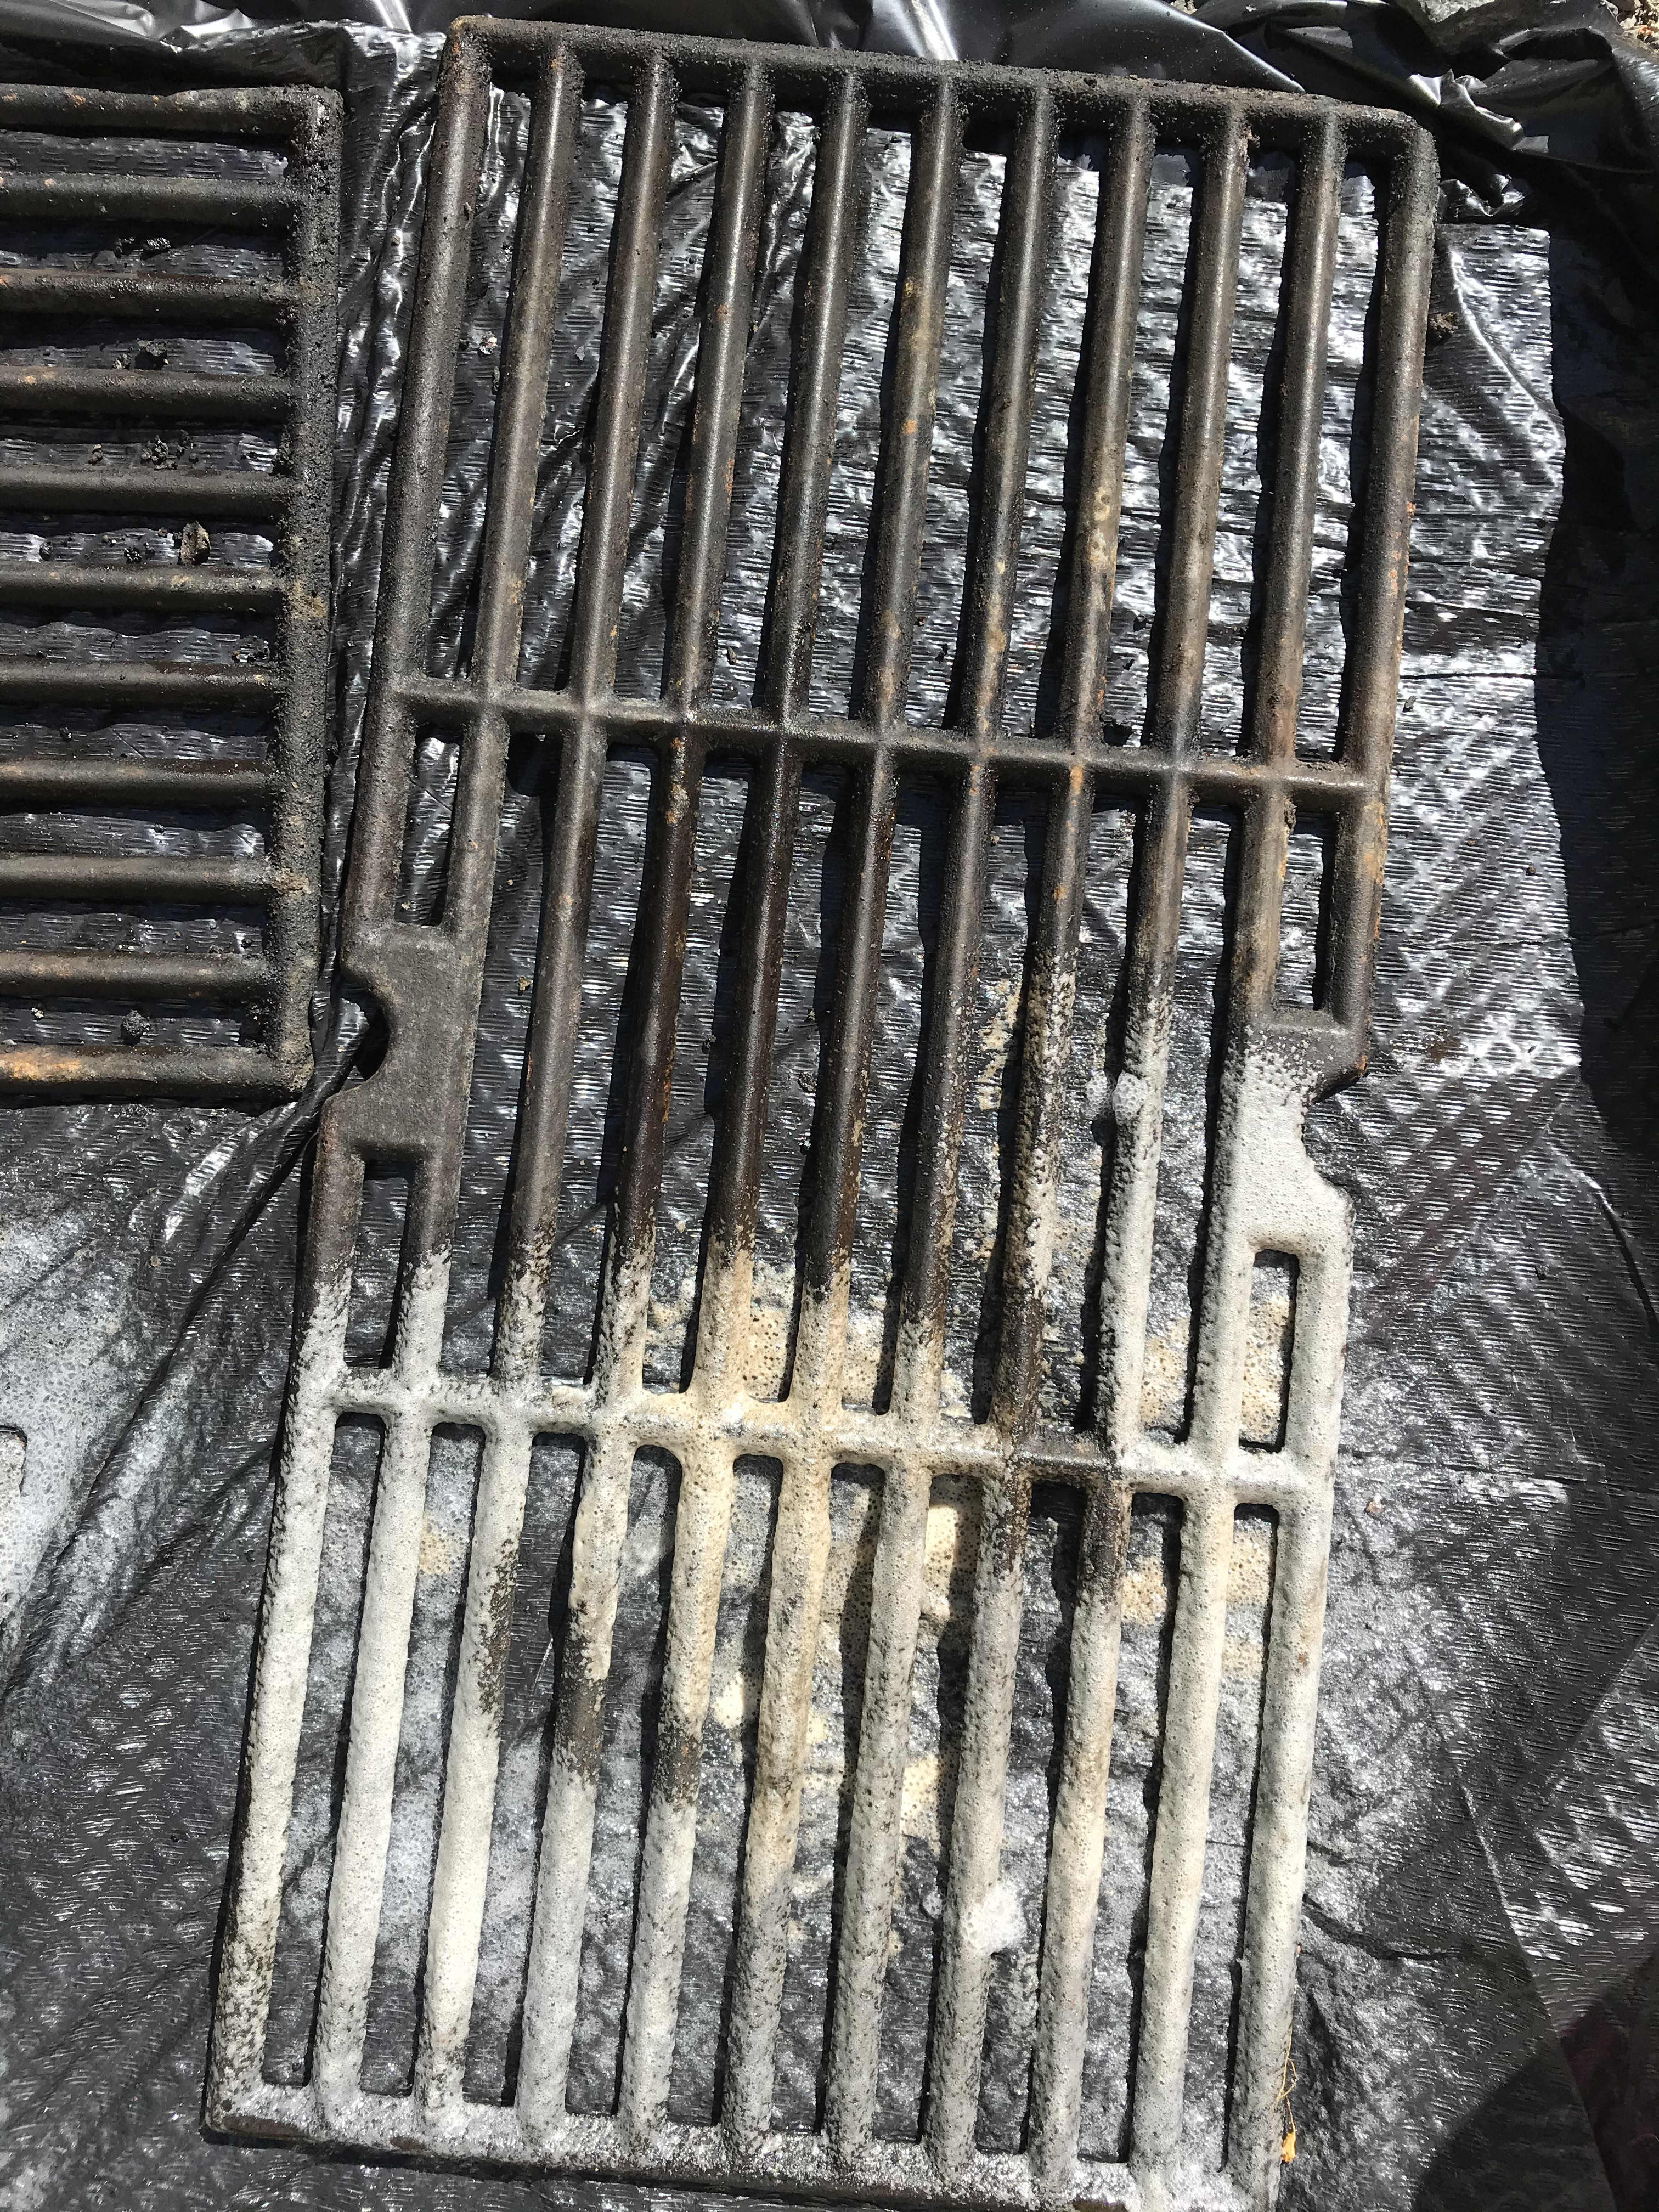 Best Method for Cleaning Grill Grates 2023